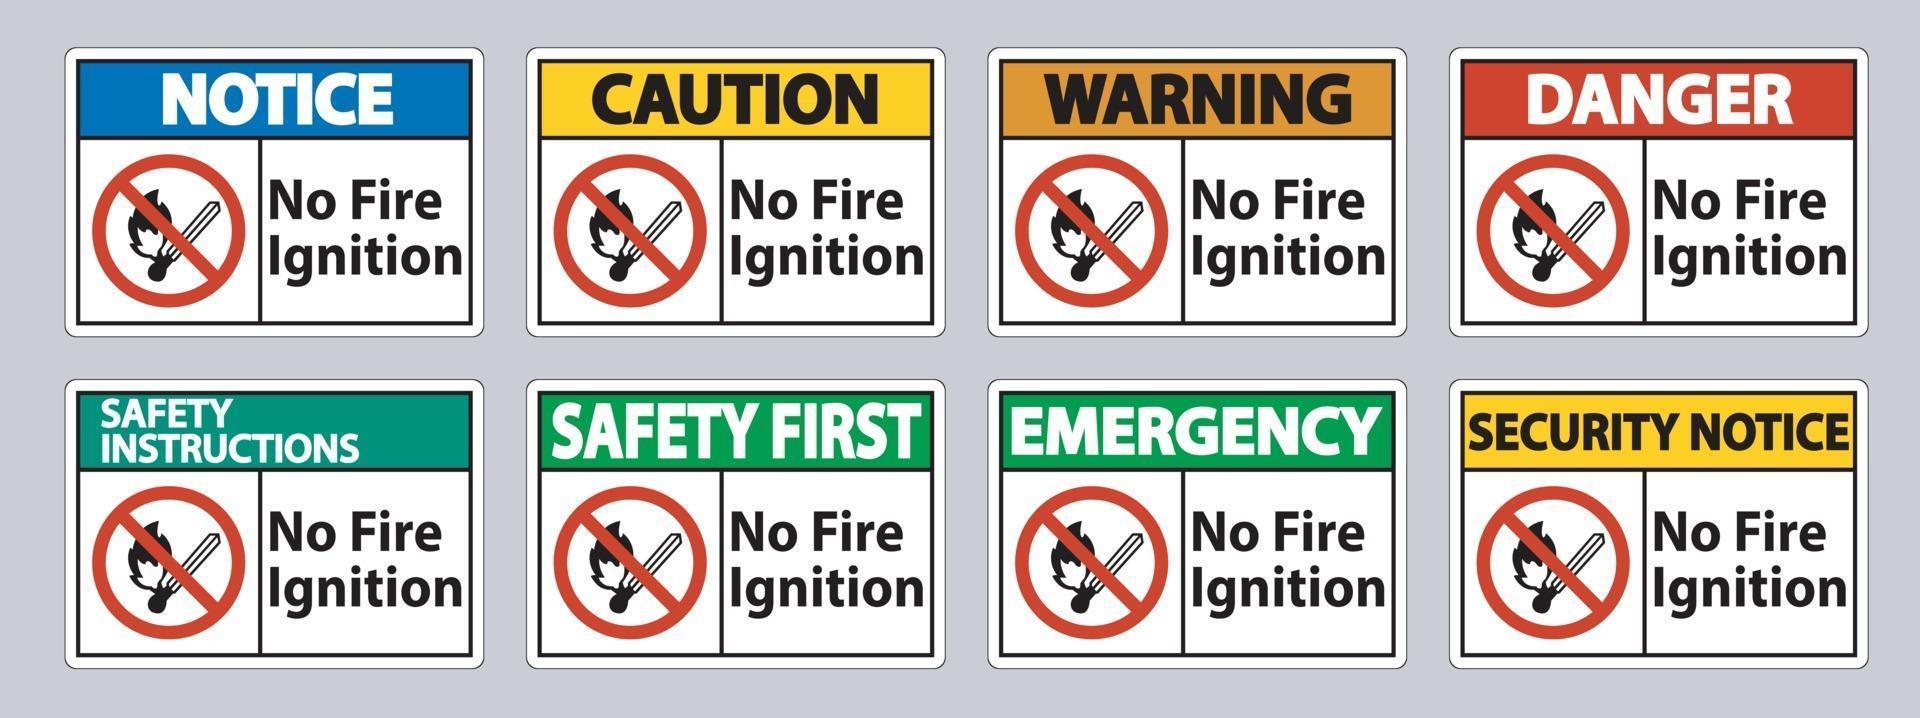 No Fire Ignition Symbol Sign On White Background vector